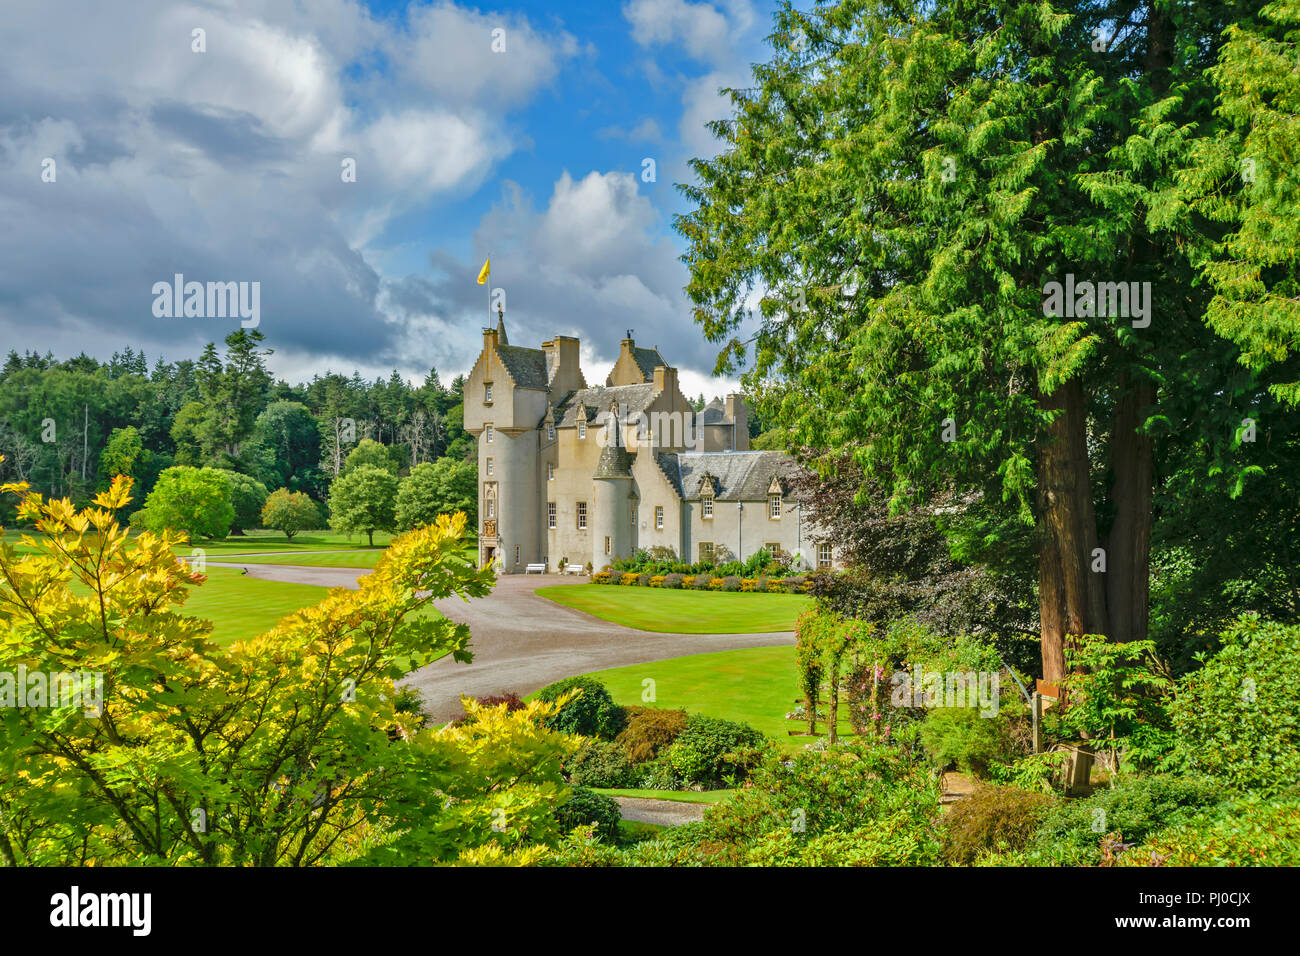 BALLINDALLOCH CASTLE BANFFSHIRE SCOTLAND CASTLE SURROUNDED BY TREES AND EXTENSIVE GARDENS Stock Photo